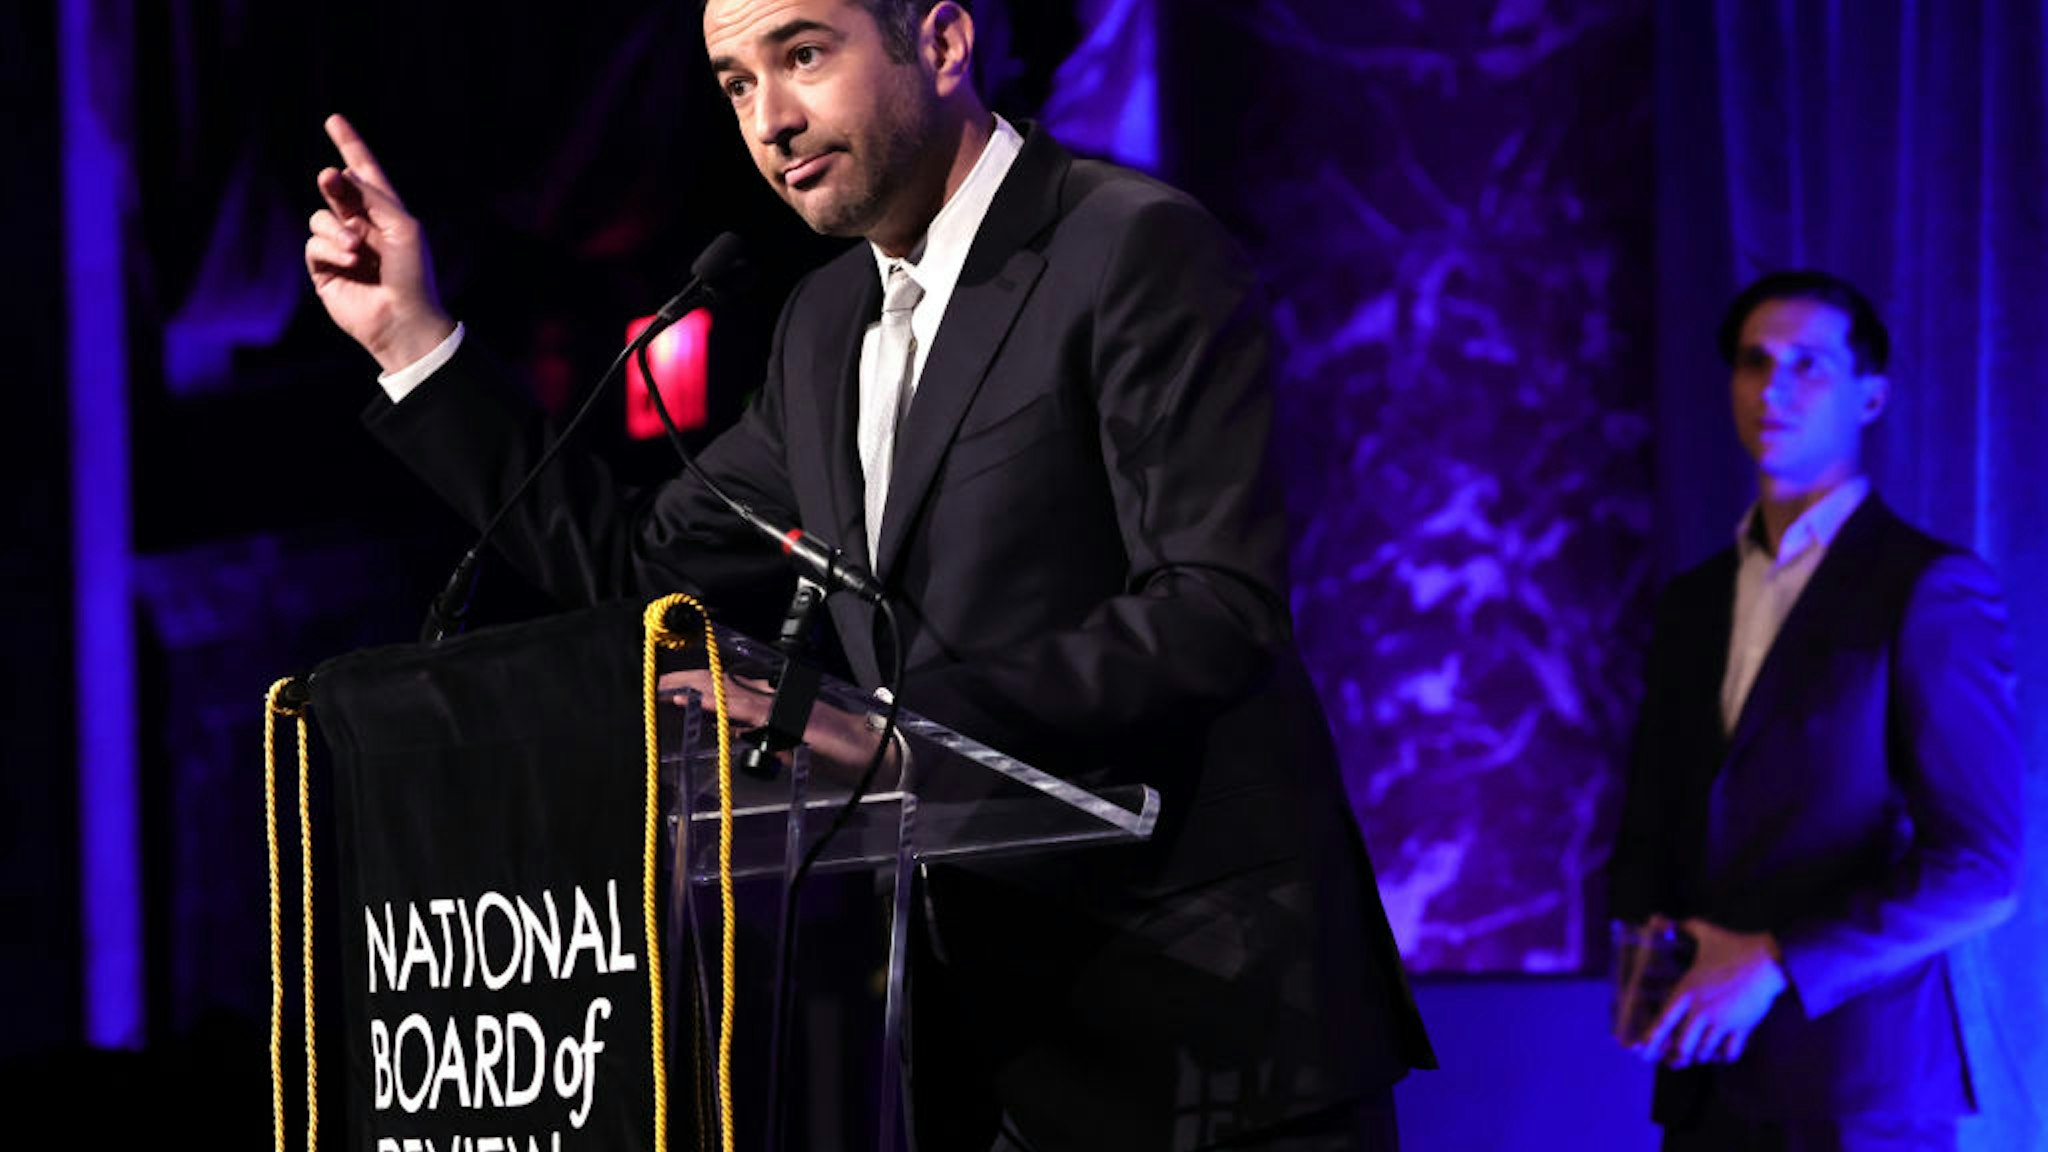 NEW YORK, NEW YORK - MARCH 15: Ari Melber speaks onstage at the National Board of Review annual awards gala at Cipriani 42nd Street on March 15, 2022 in New York City. (Photo by Jamie McCarthy/Getty Images for National Board of Review